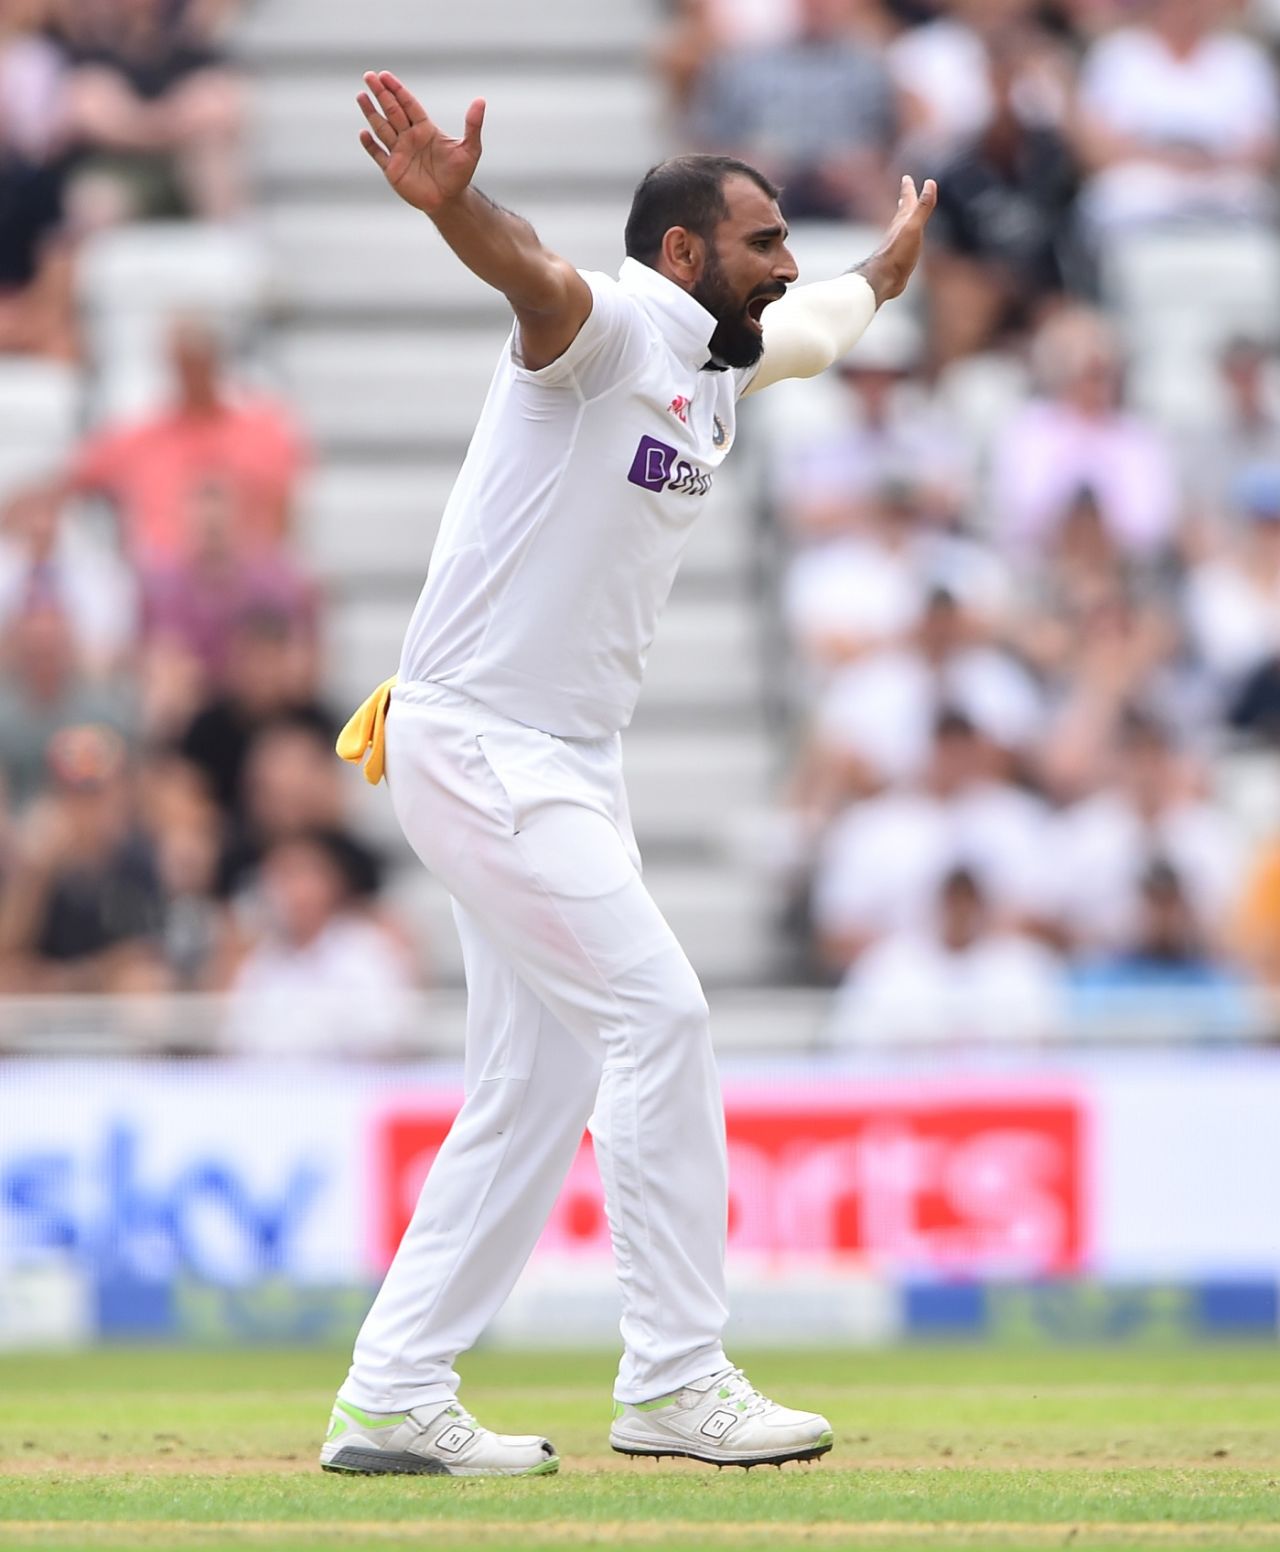 Mohammed Shami trapped Jonny Bairstow at the stroke of tea, England vs India, 1st Test, Nottingham, 1st day, August 4, 2021